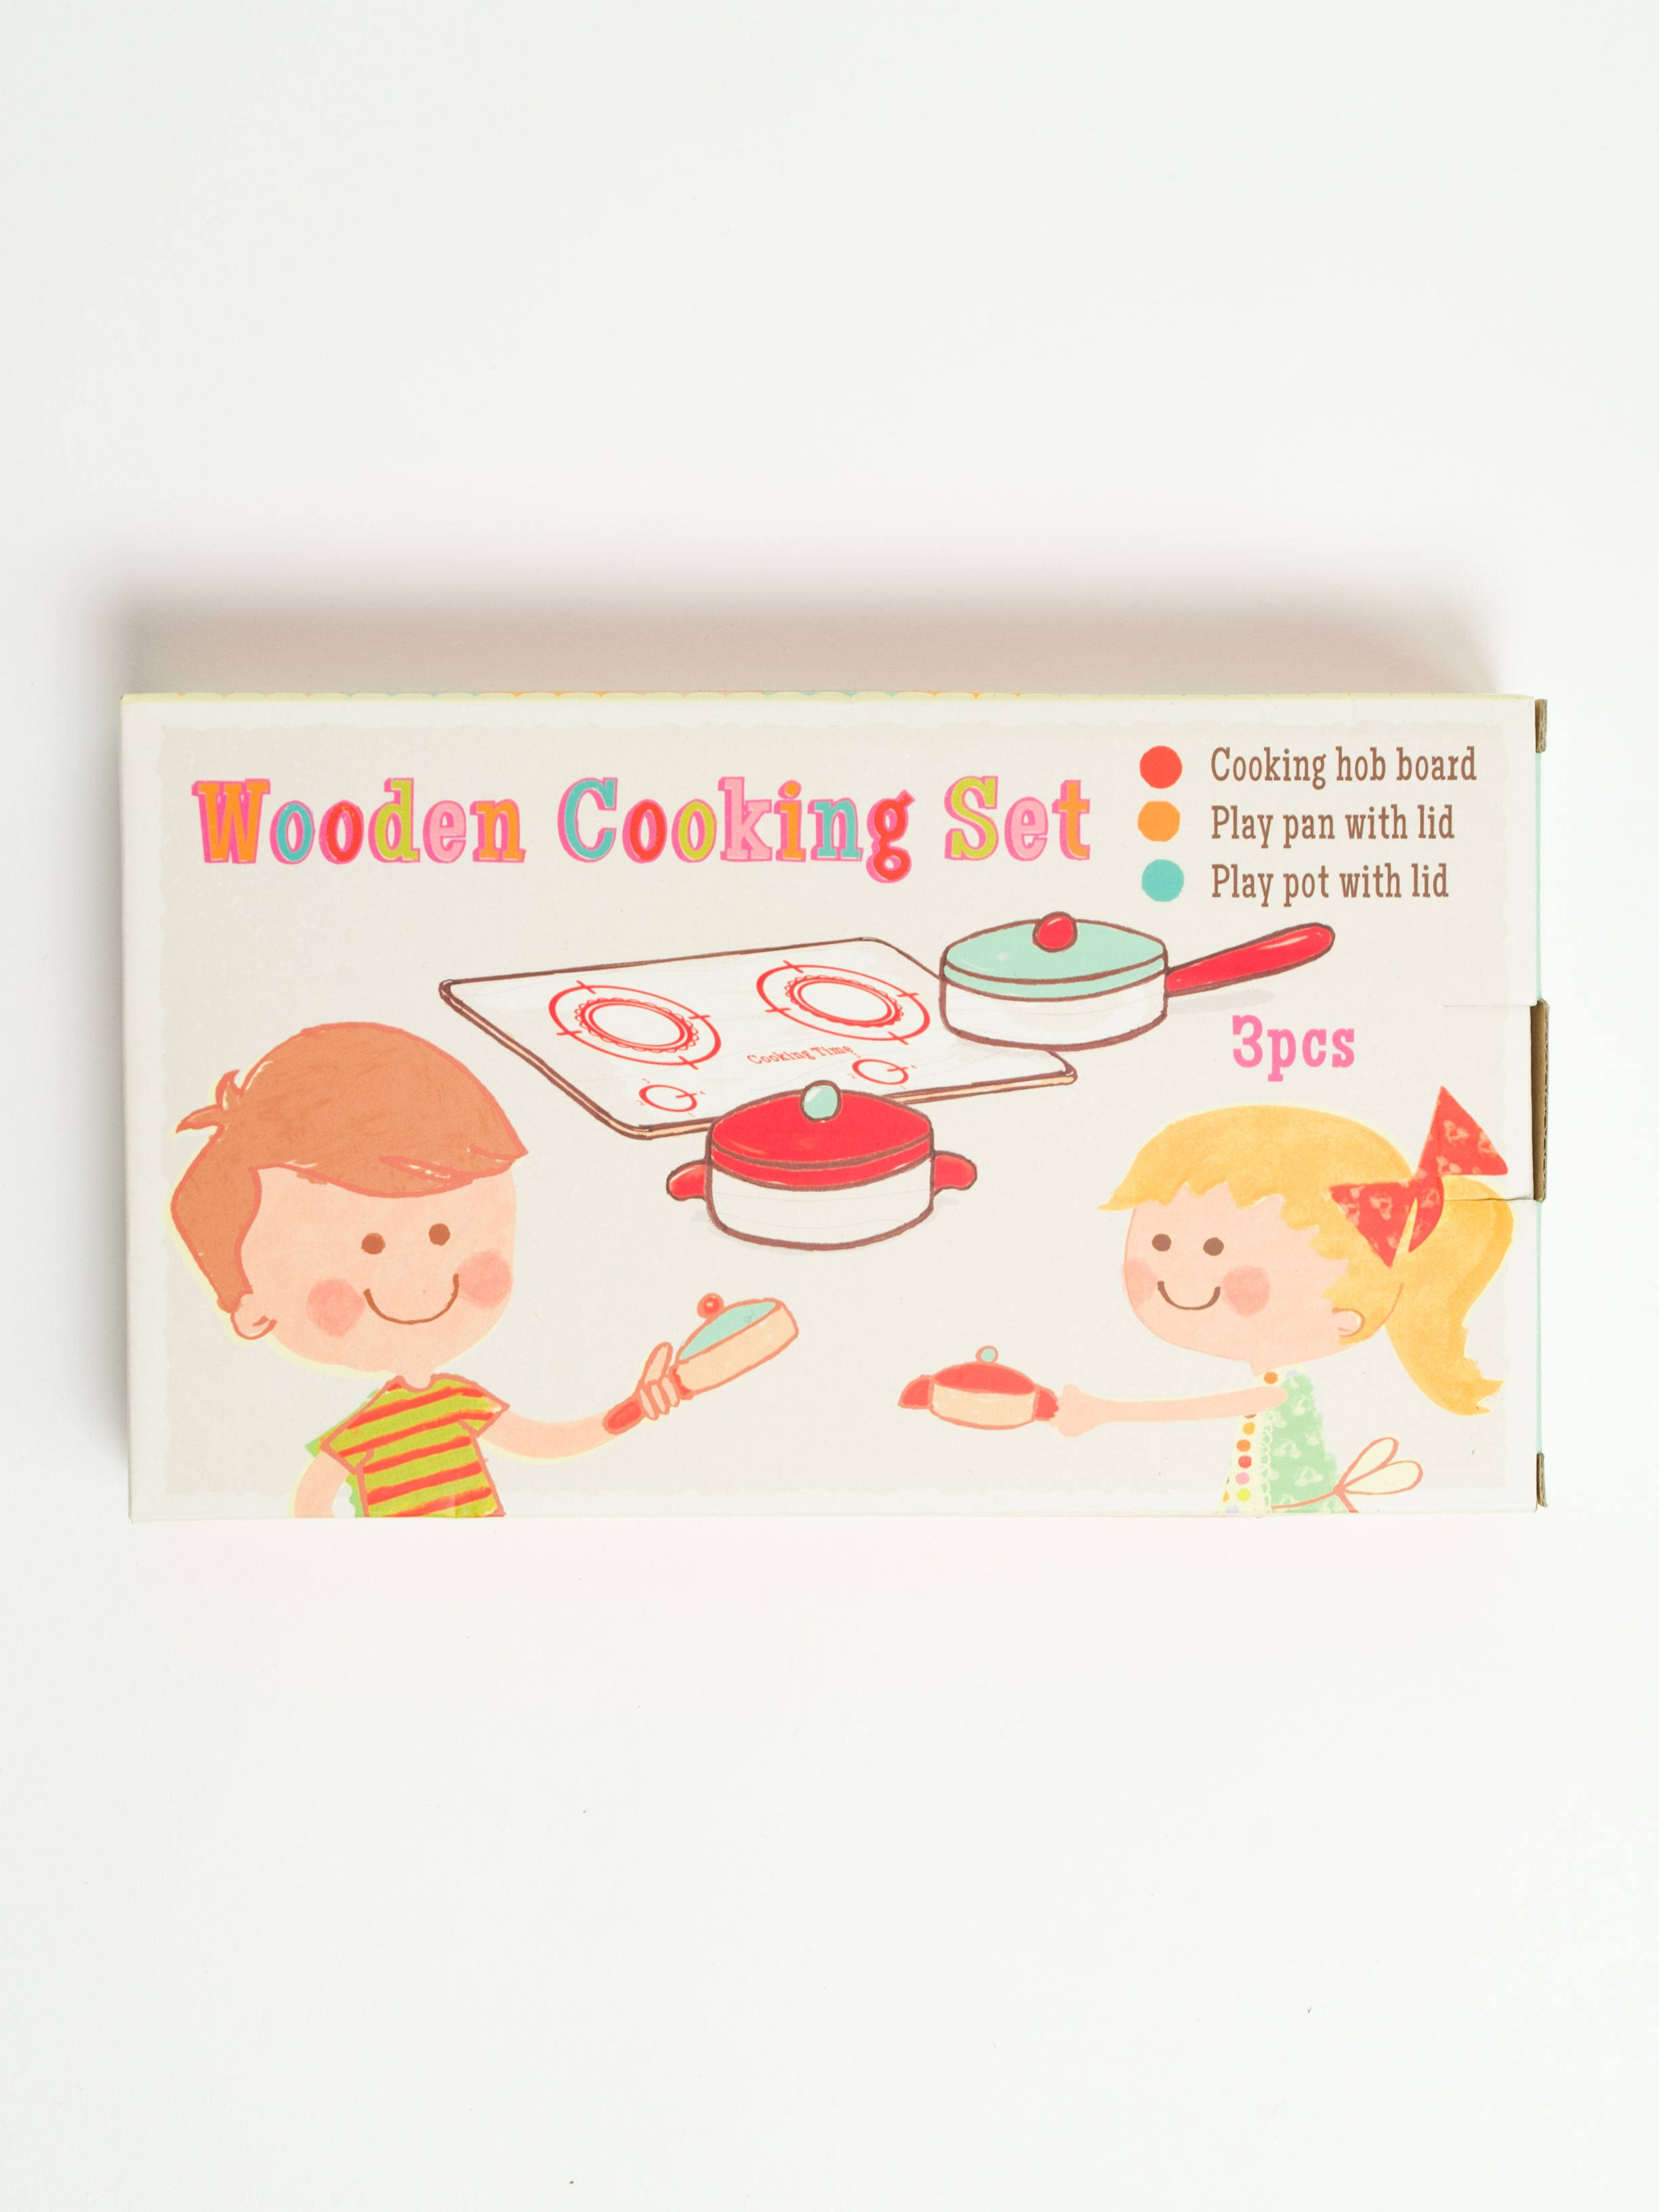 Rex London - Wooden Cooking Set Toy - Wood/White/Red